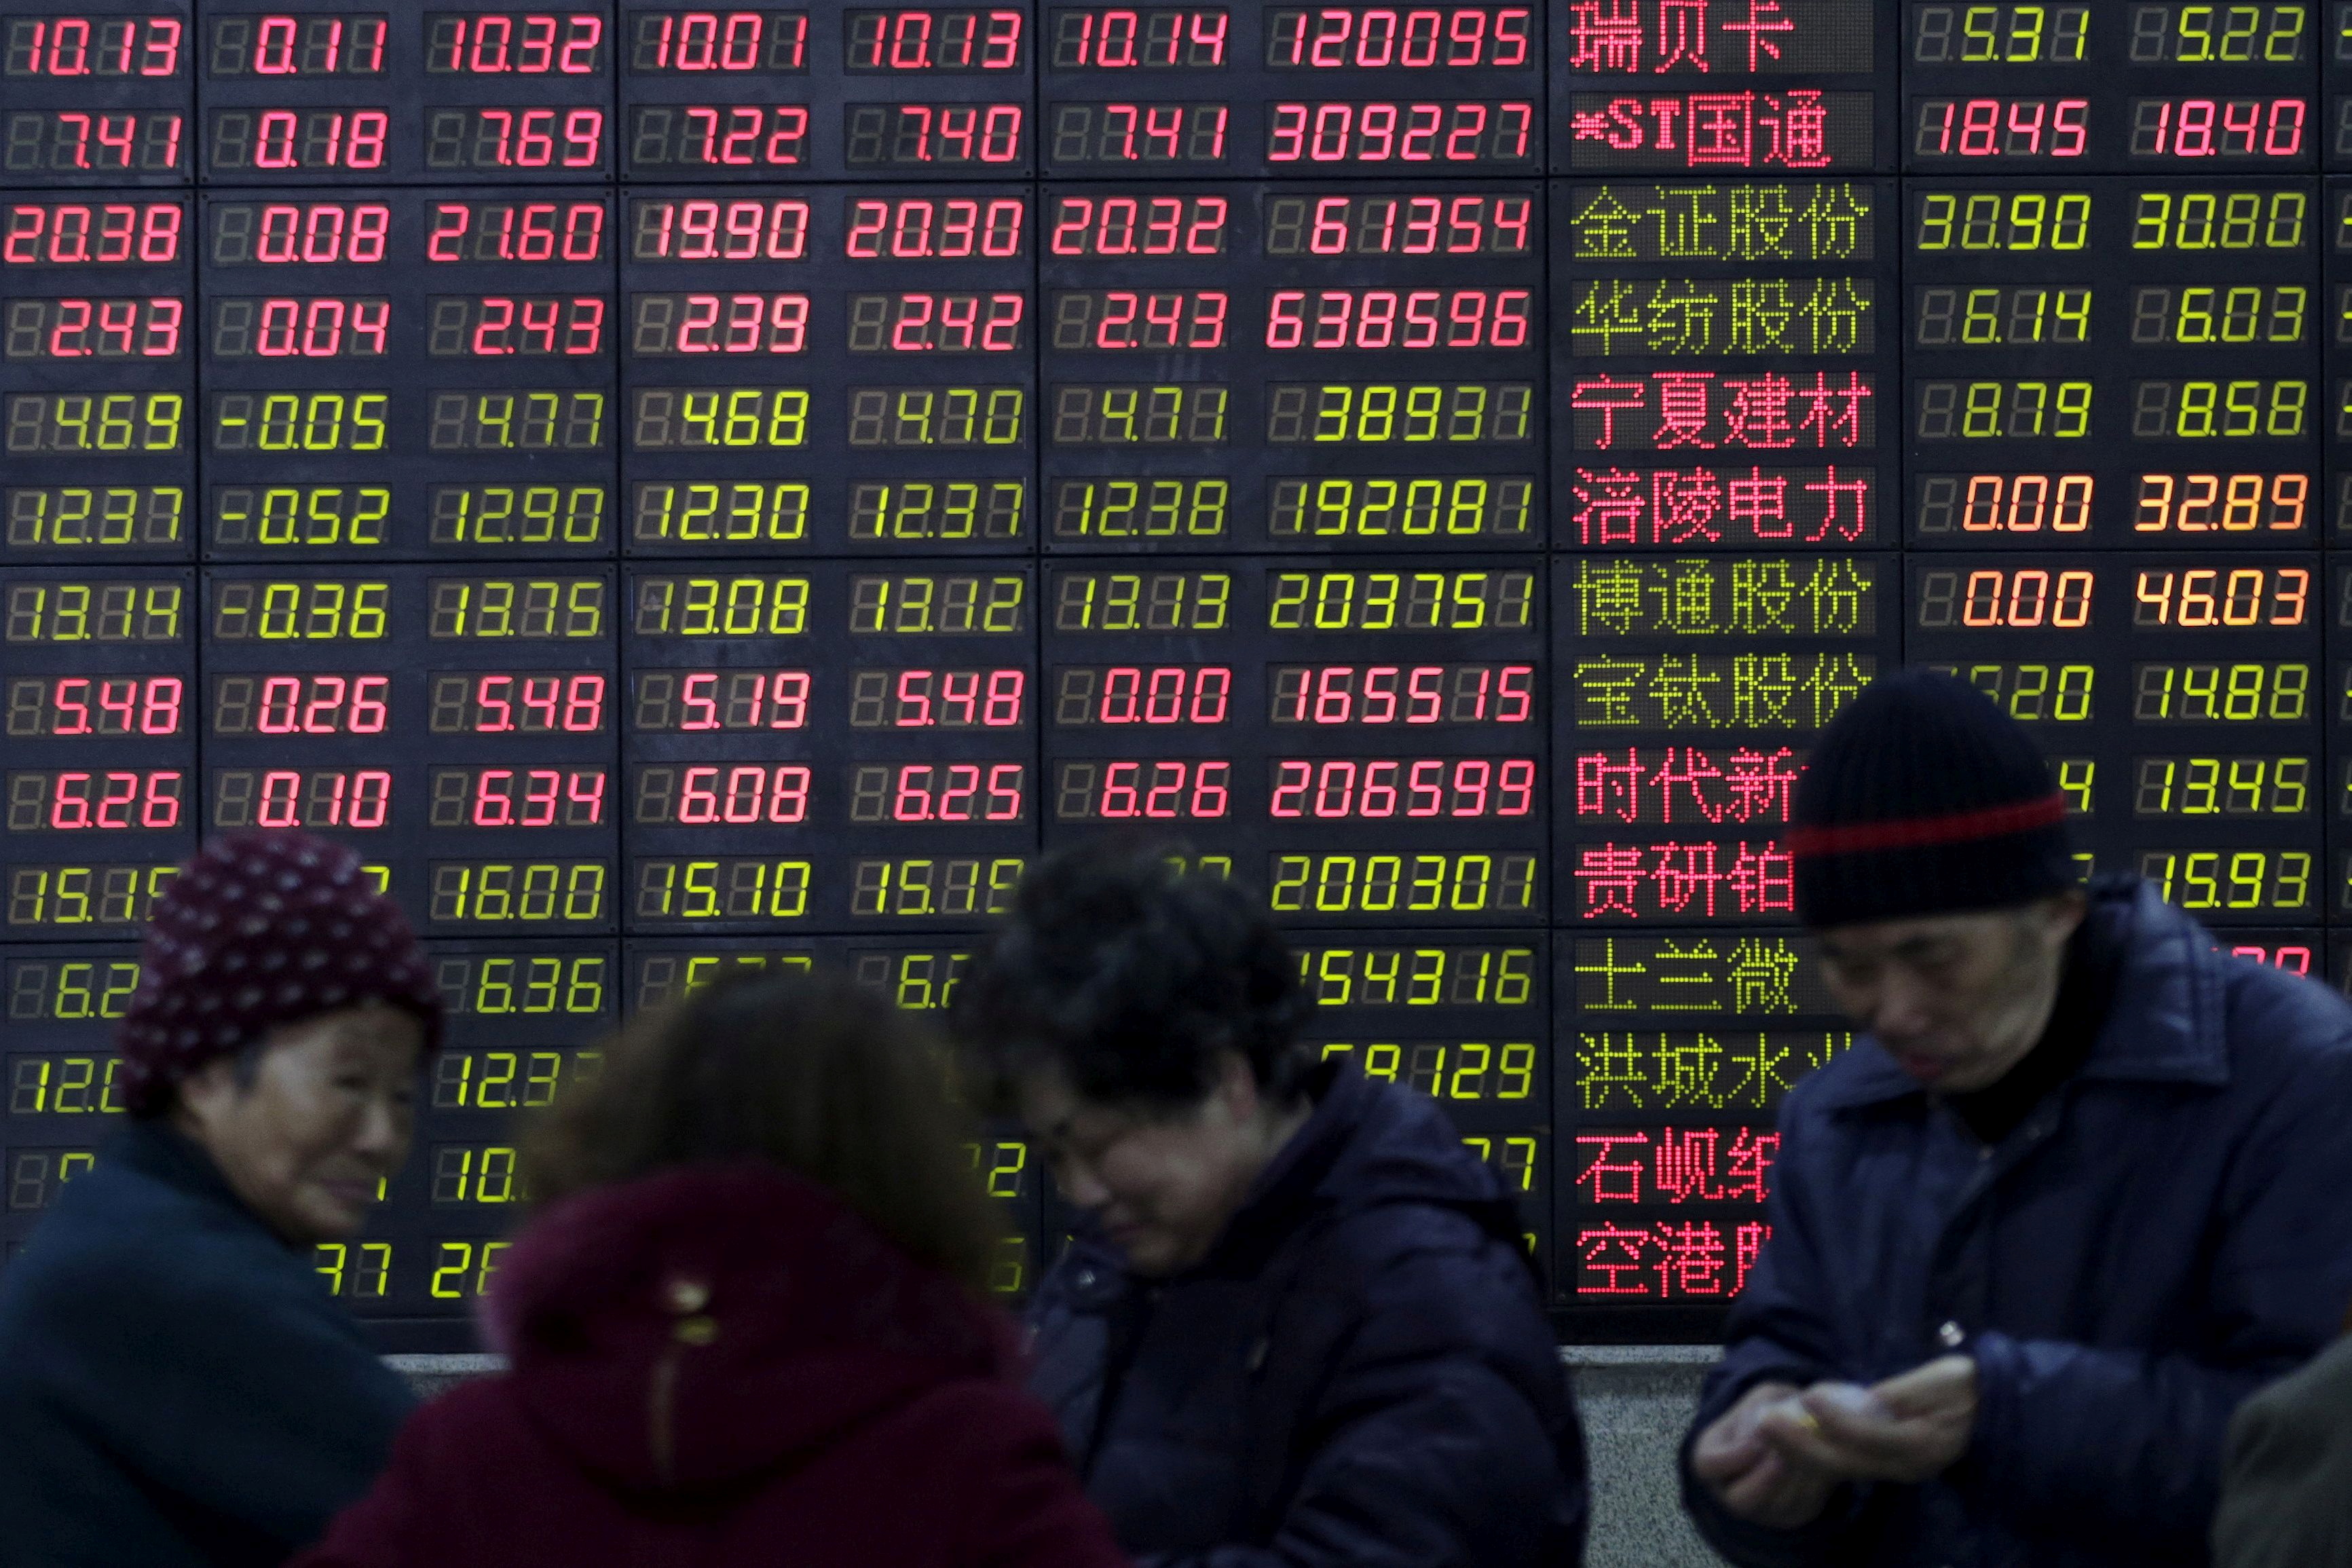 FILE PHOTO: Investors stand in front of an electronic board showing stock information on the first trading day after the week-long Lunar New Year holiday at a brokerage house in Shanghai